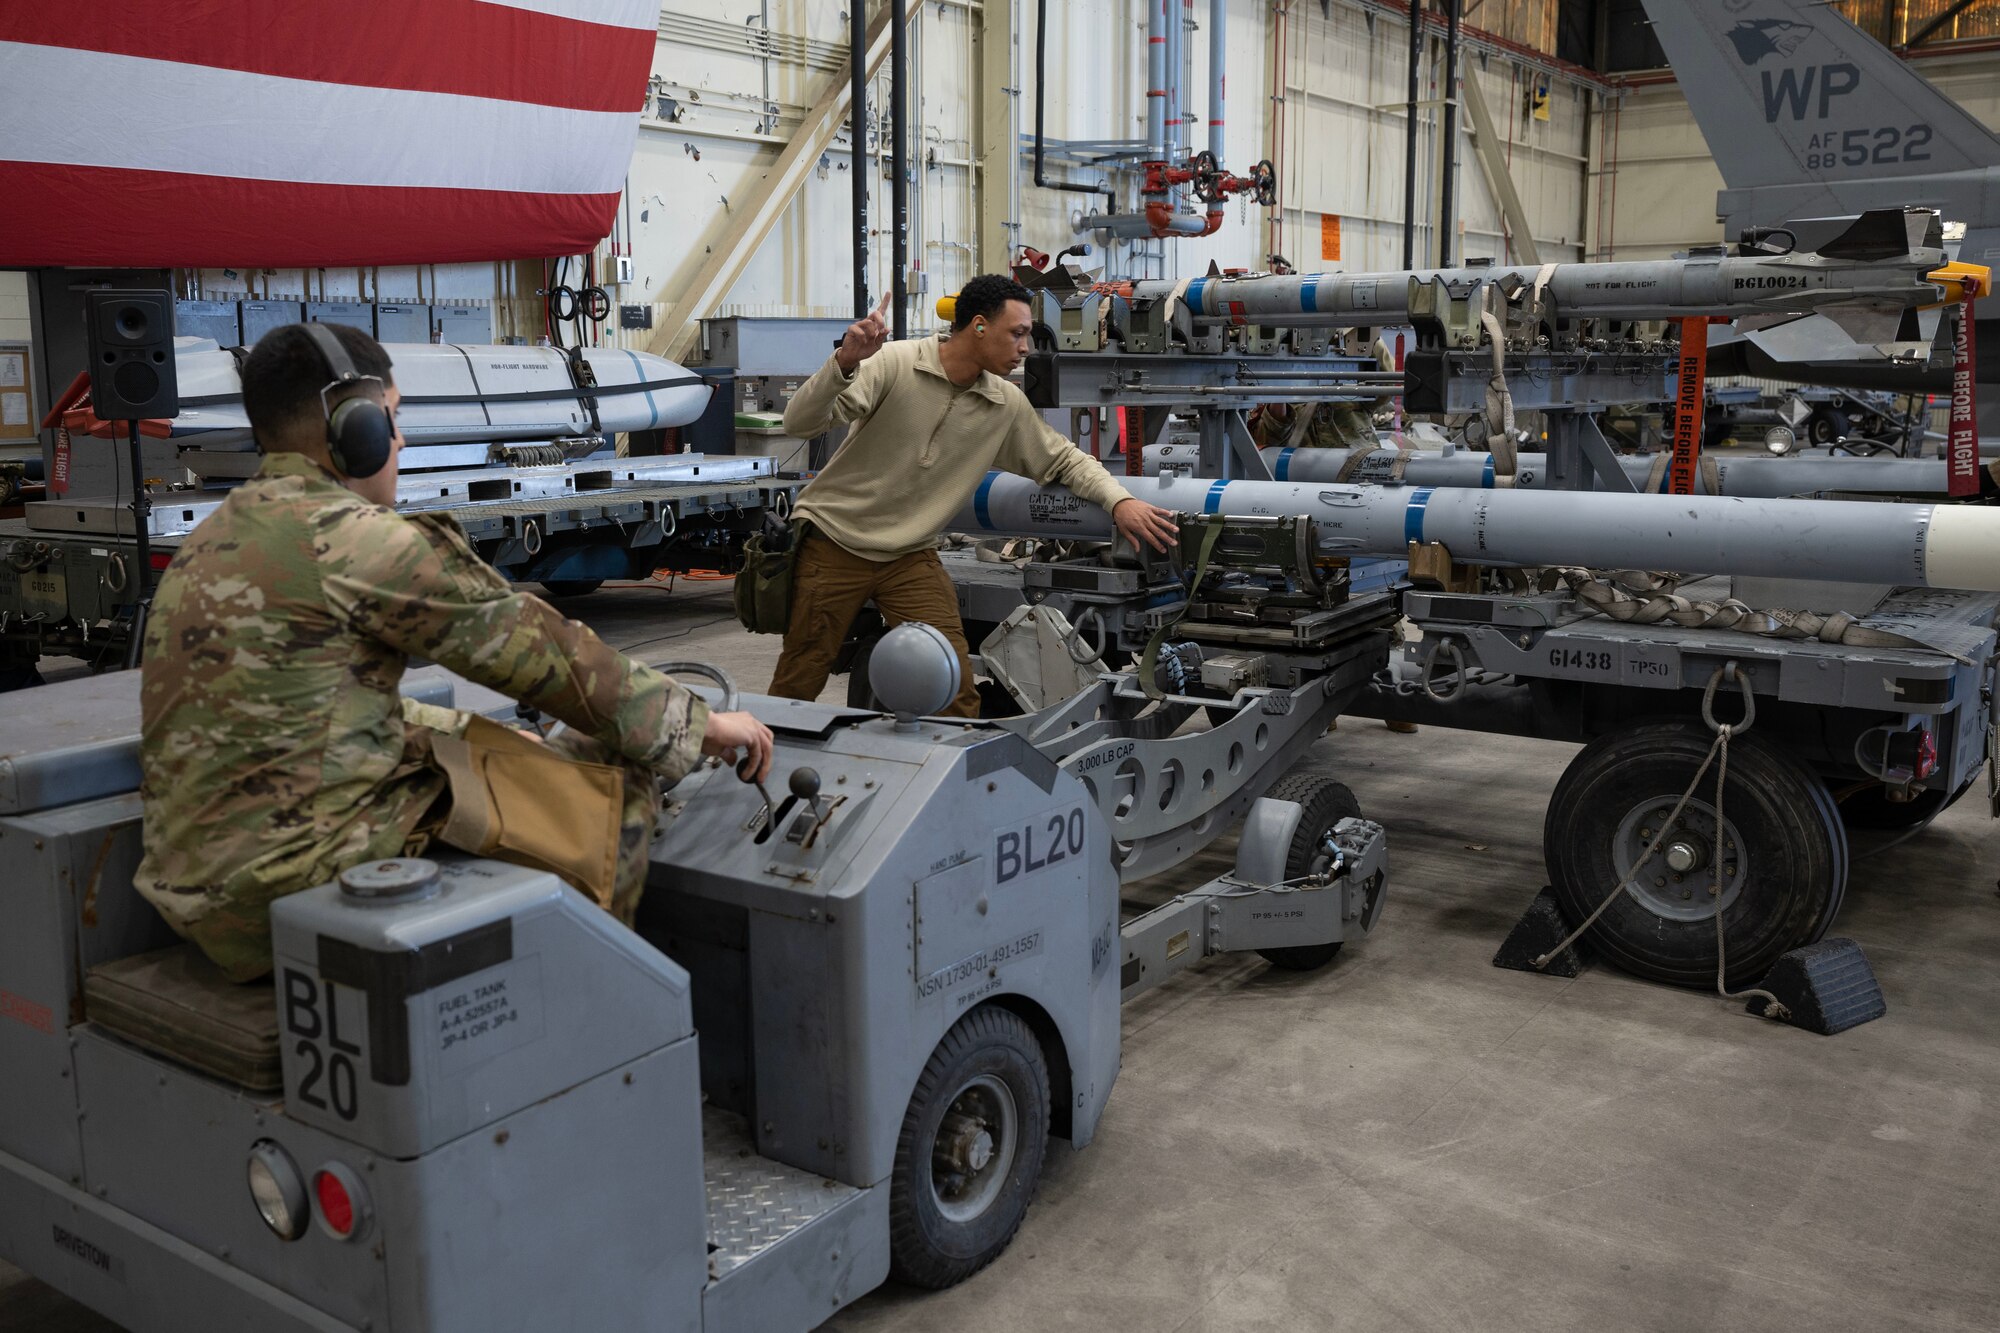 An Airman guides another Airman on picking up an Air Intercept Missile with a jammer vehicle.